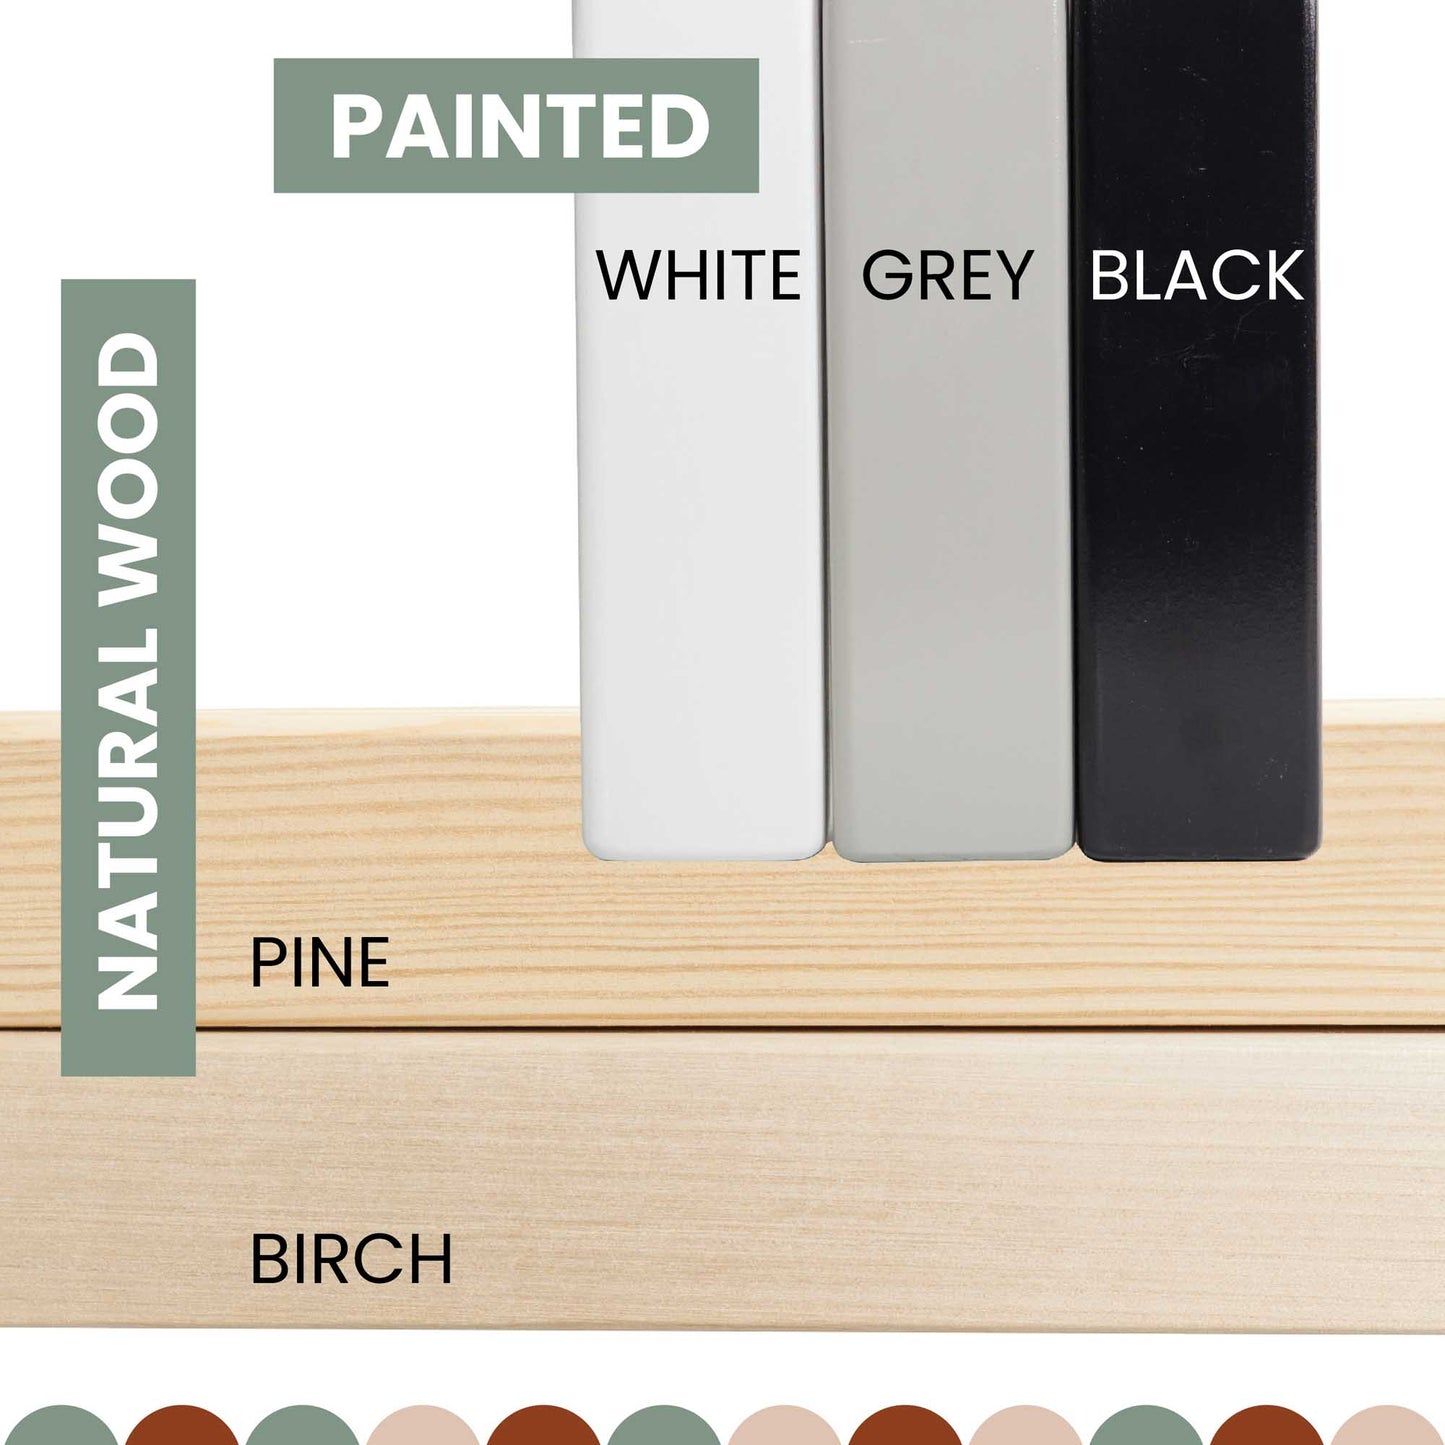 The paint colors for the Children's house bed on legs with 3-sided rails include pine, birch, and white.